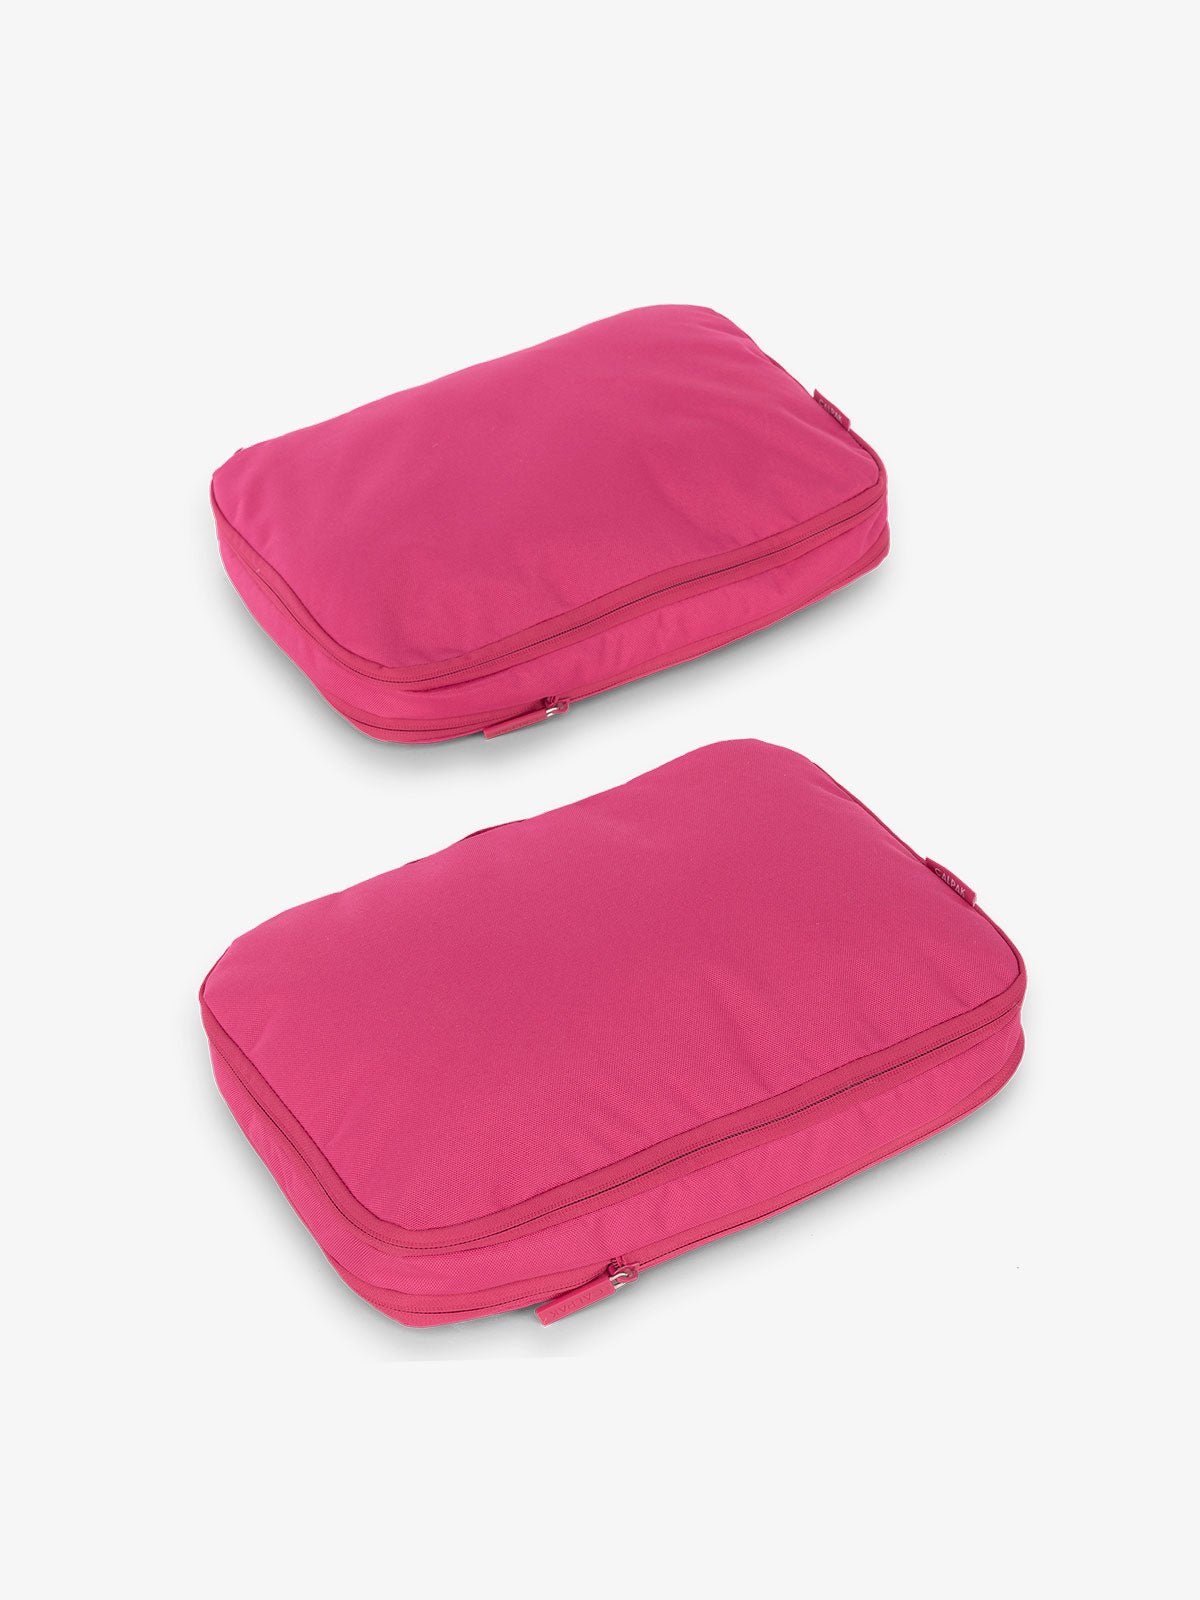 CALPAK compression packing cubes in dragonfruit